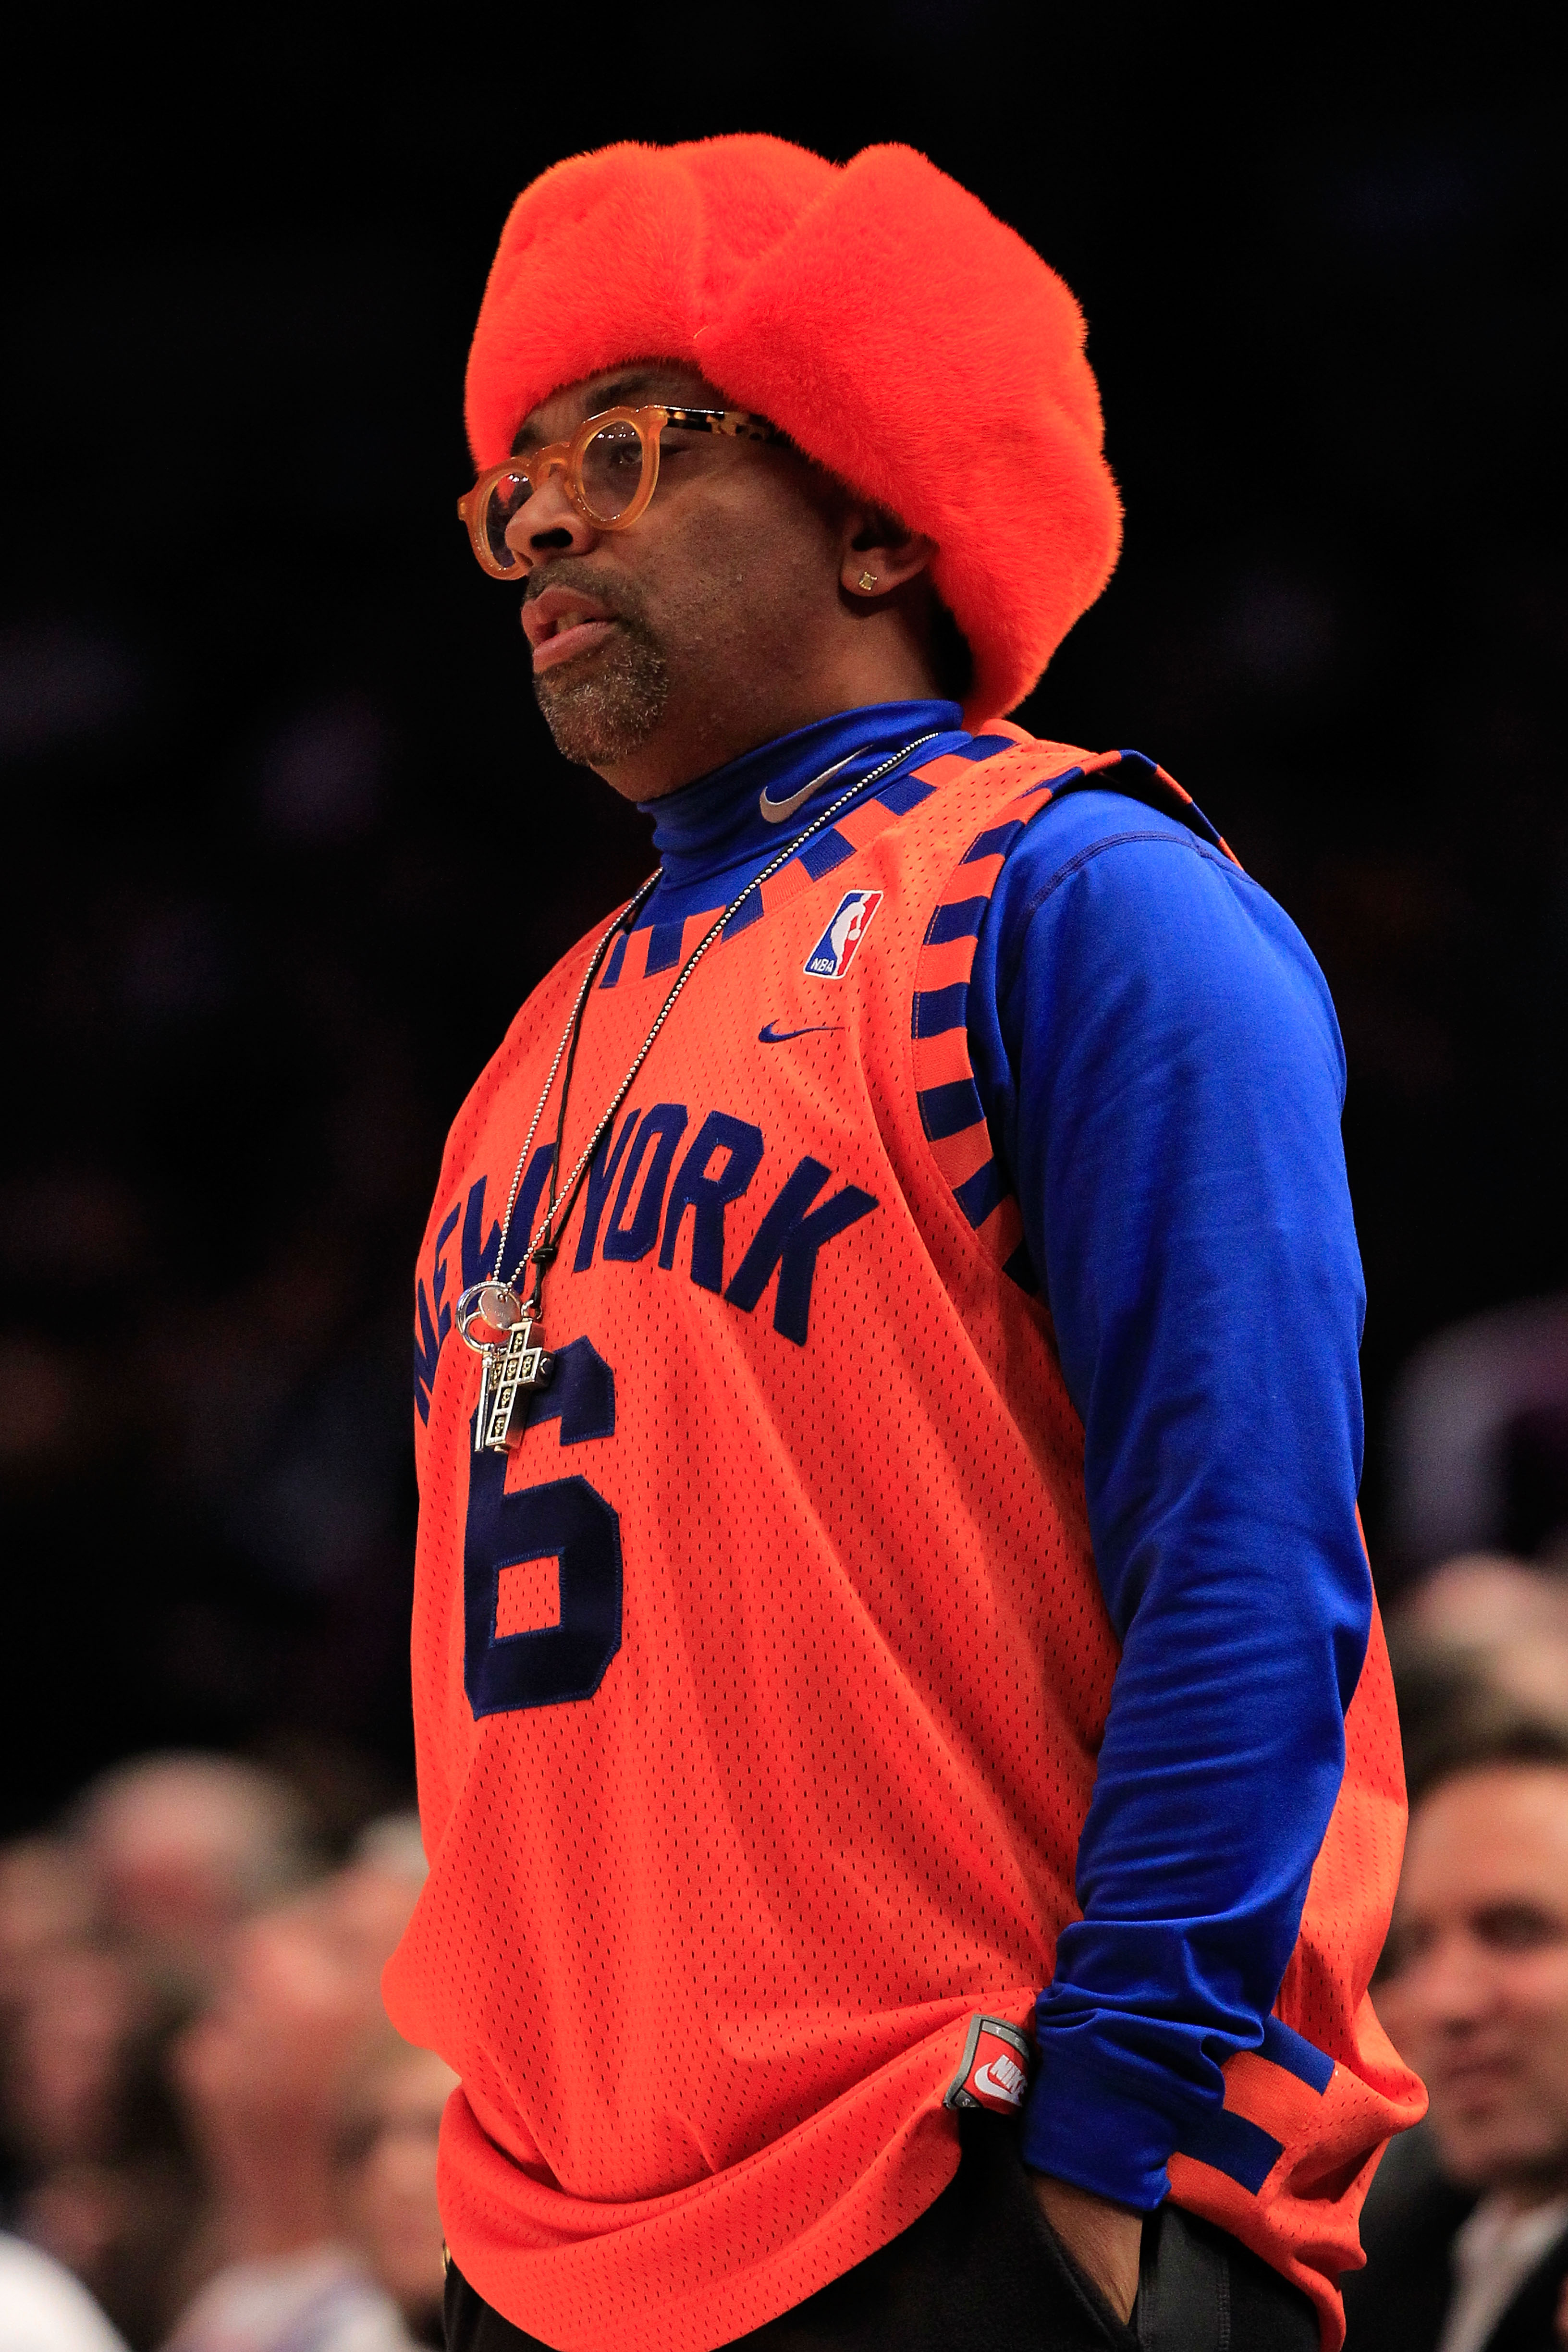 NEW YORK, NY - FEBRUARY 11: Film director Spike Lee watches the game between the Los Angeles Lakers and the New York Knicks at Madison Square Garden on February 11, 2011 in New York City. NOTE TO USER: User expressly acknowledges and agrees that, by downl